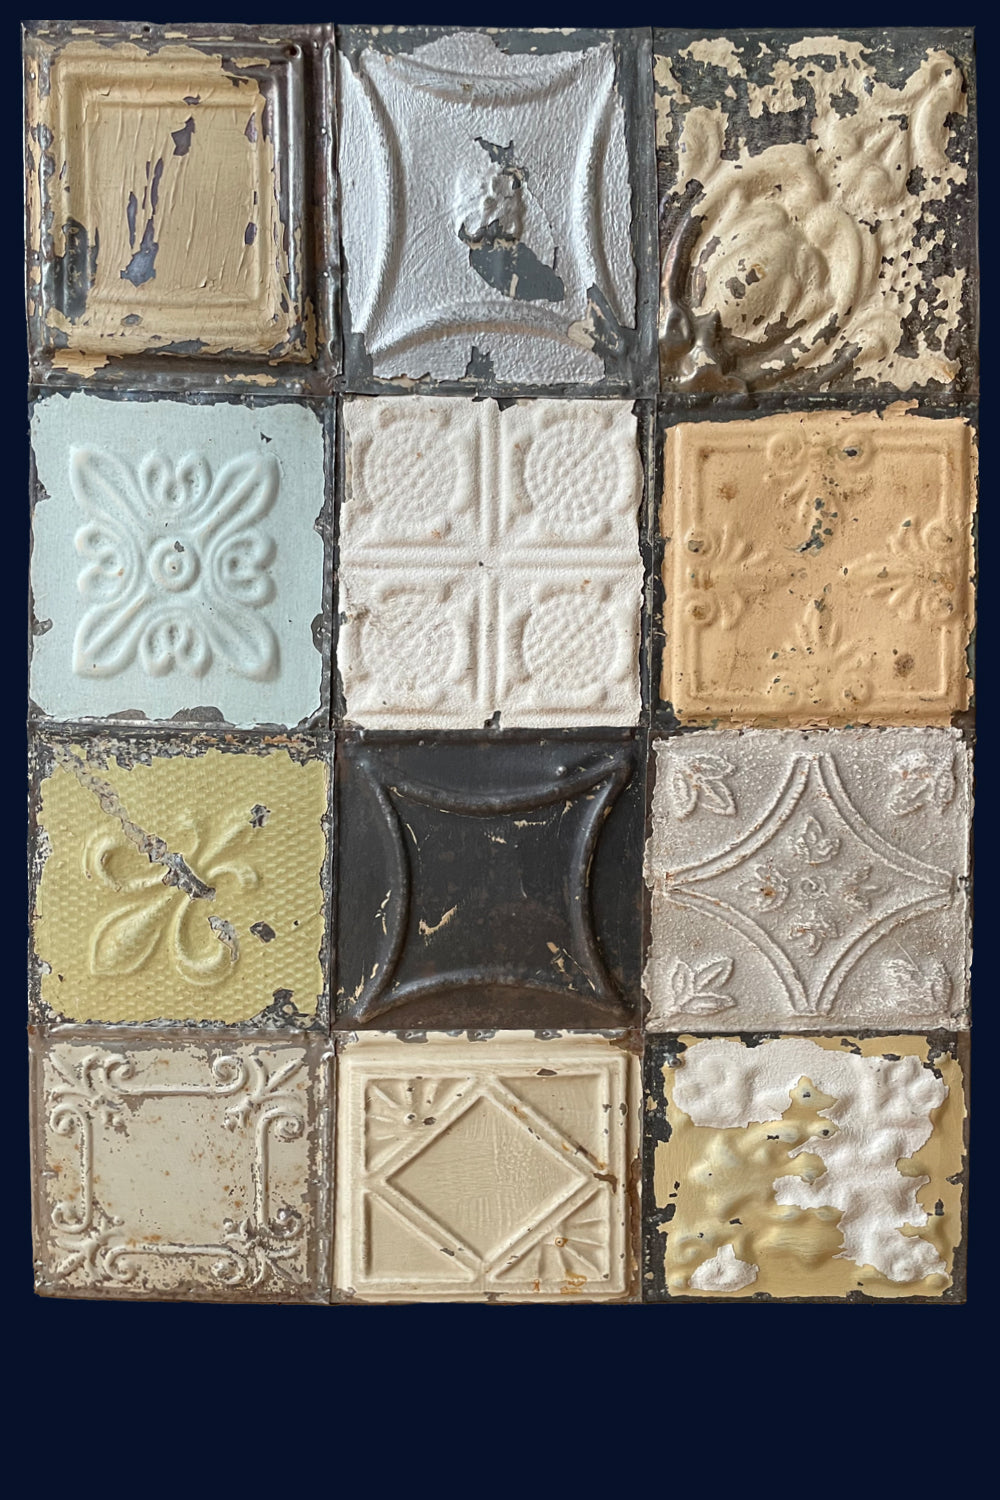 Enigma Variations Collection: Mounted Collection of Antique USA Tin Ceiling Tiles (156)